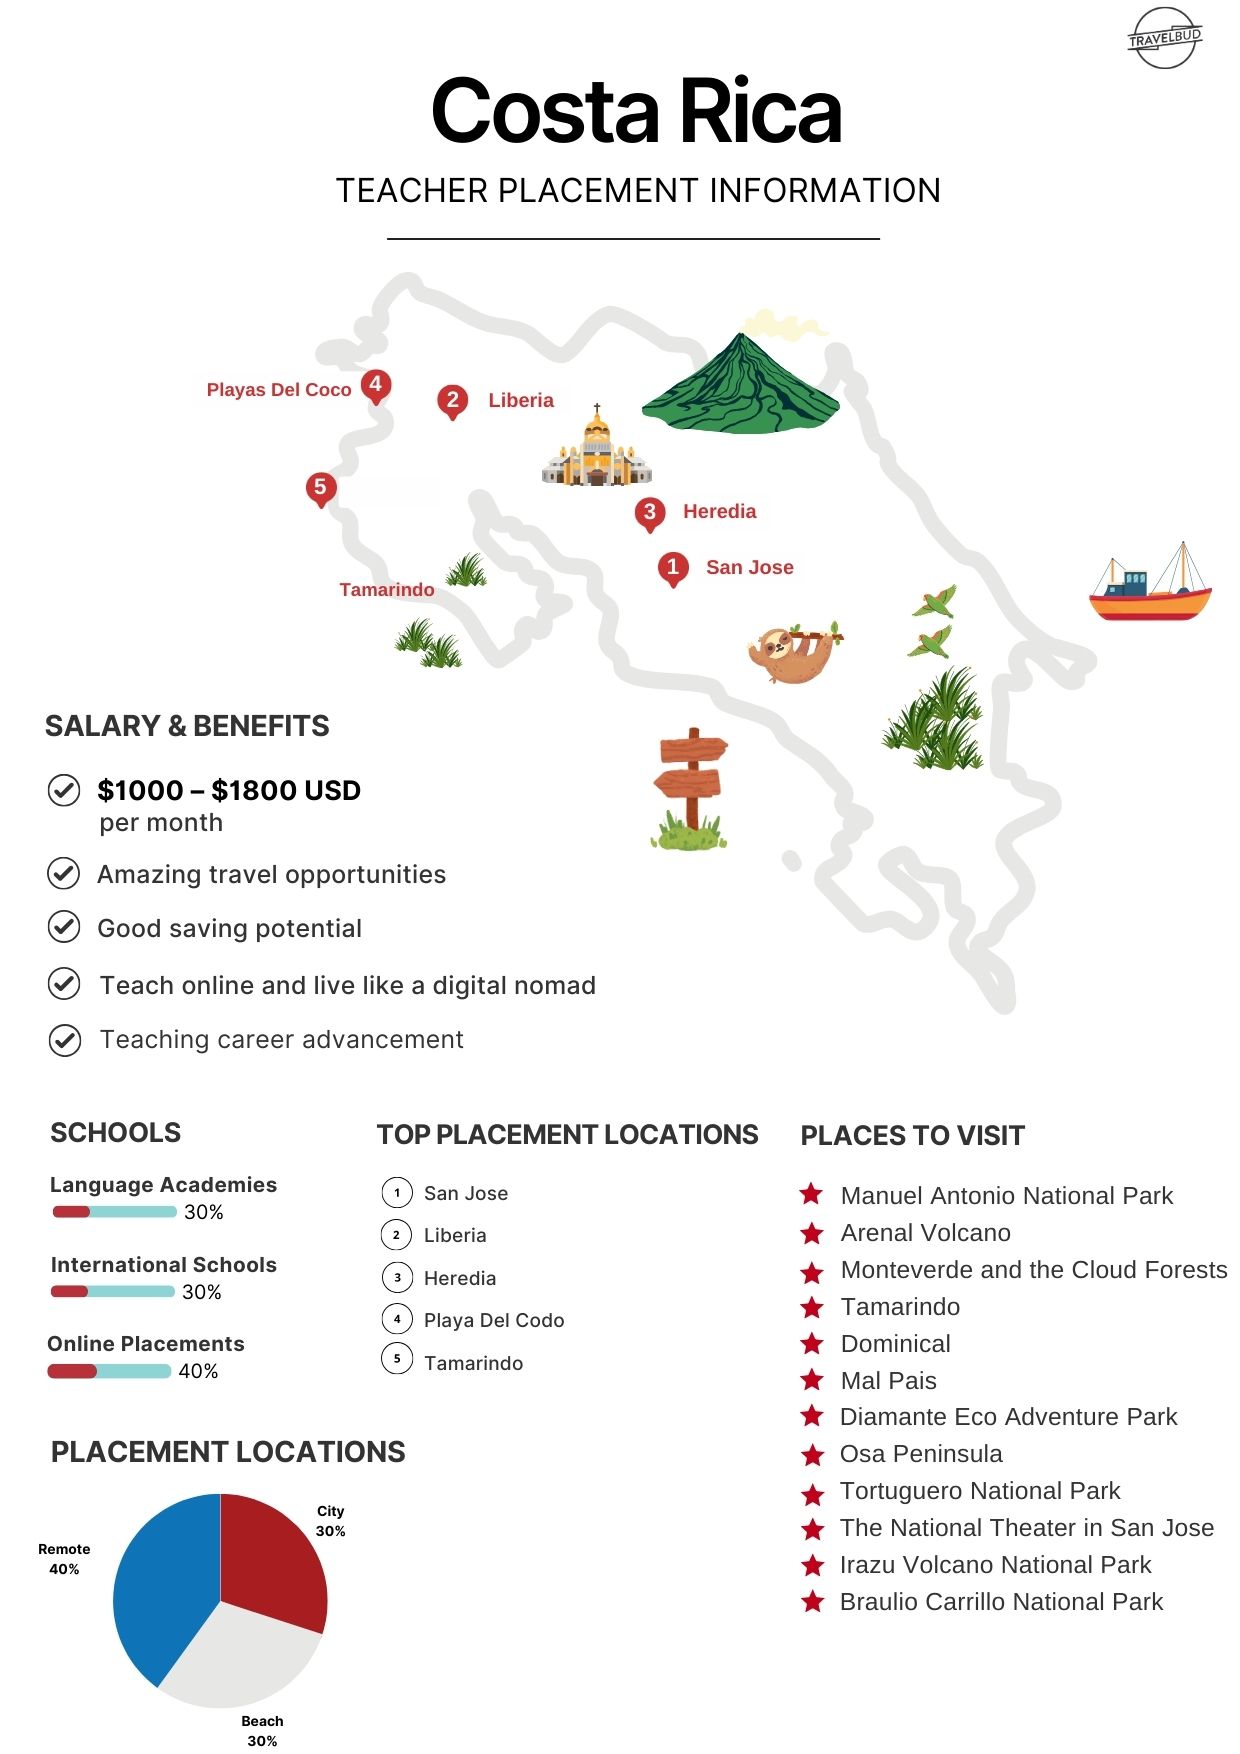 Costa Rica Teacher Placement Information Infographic